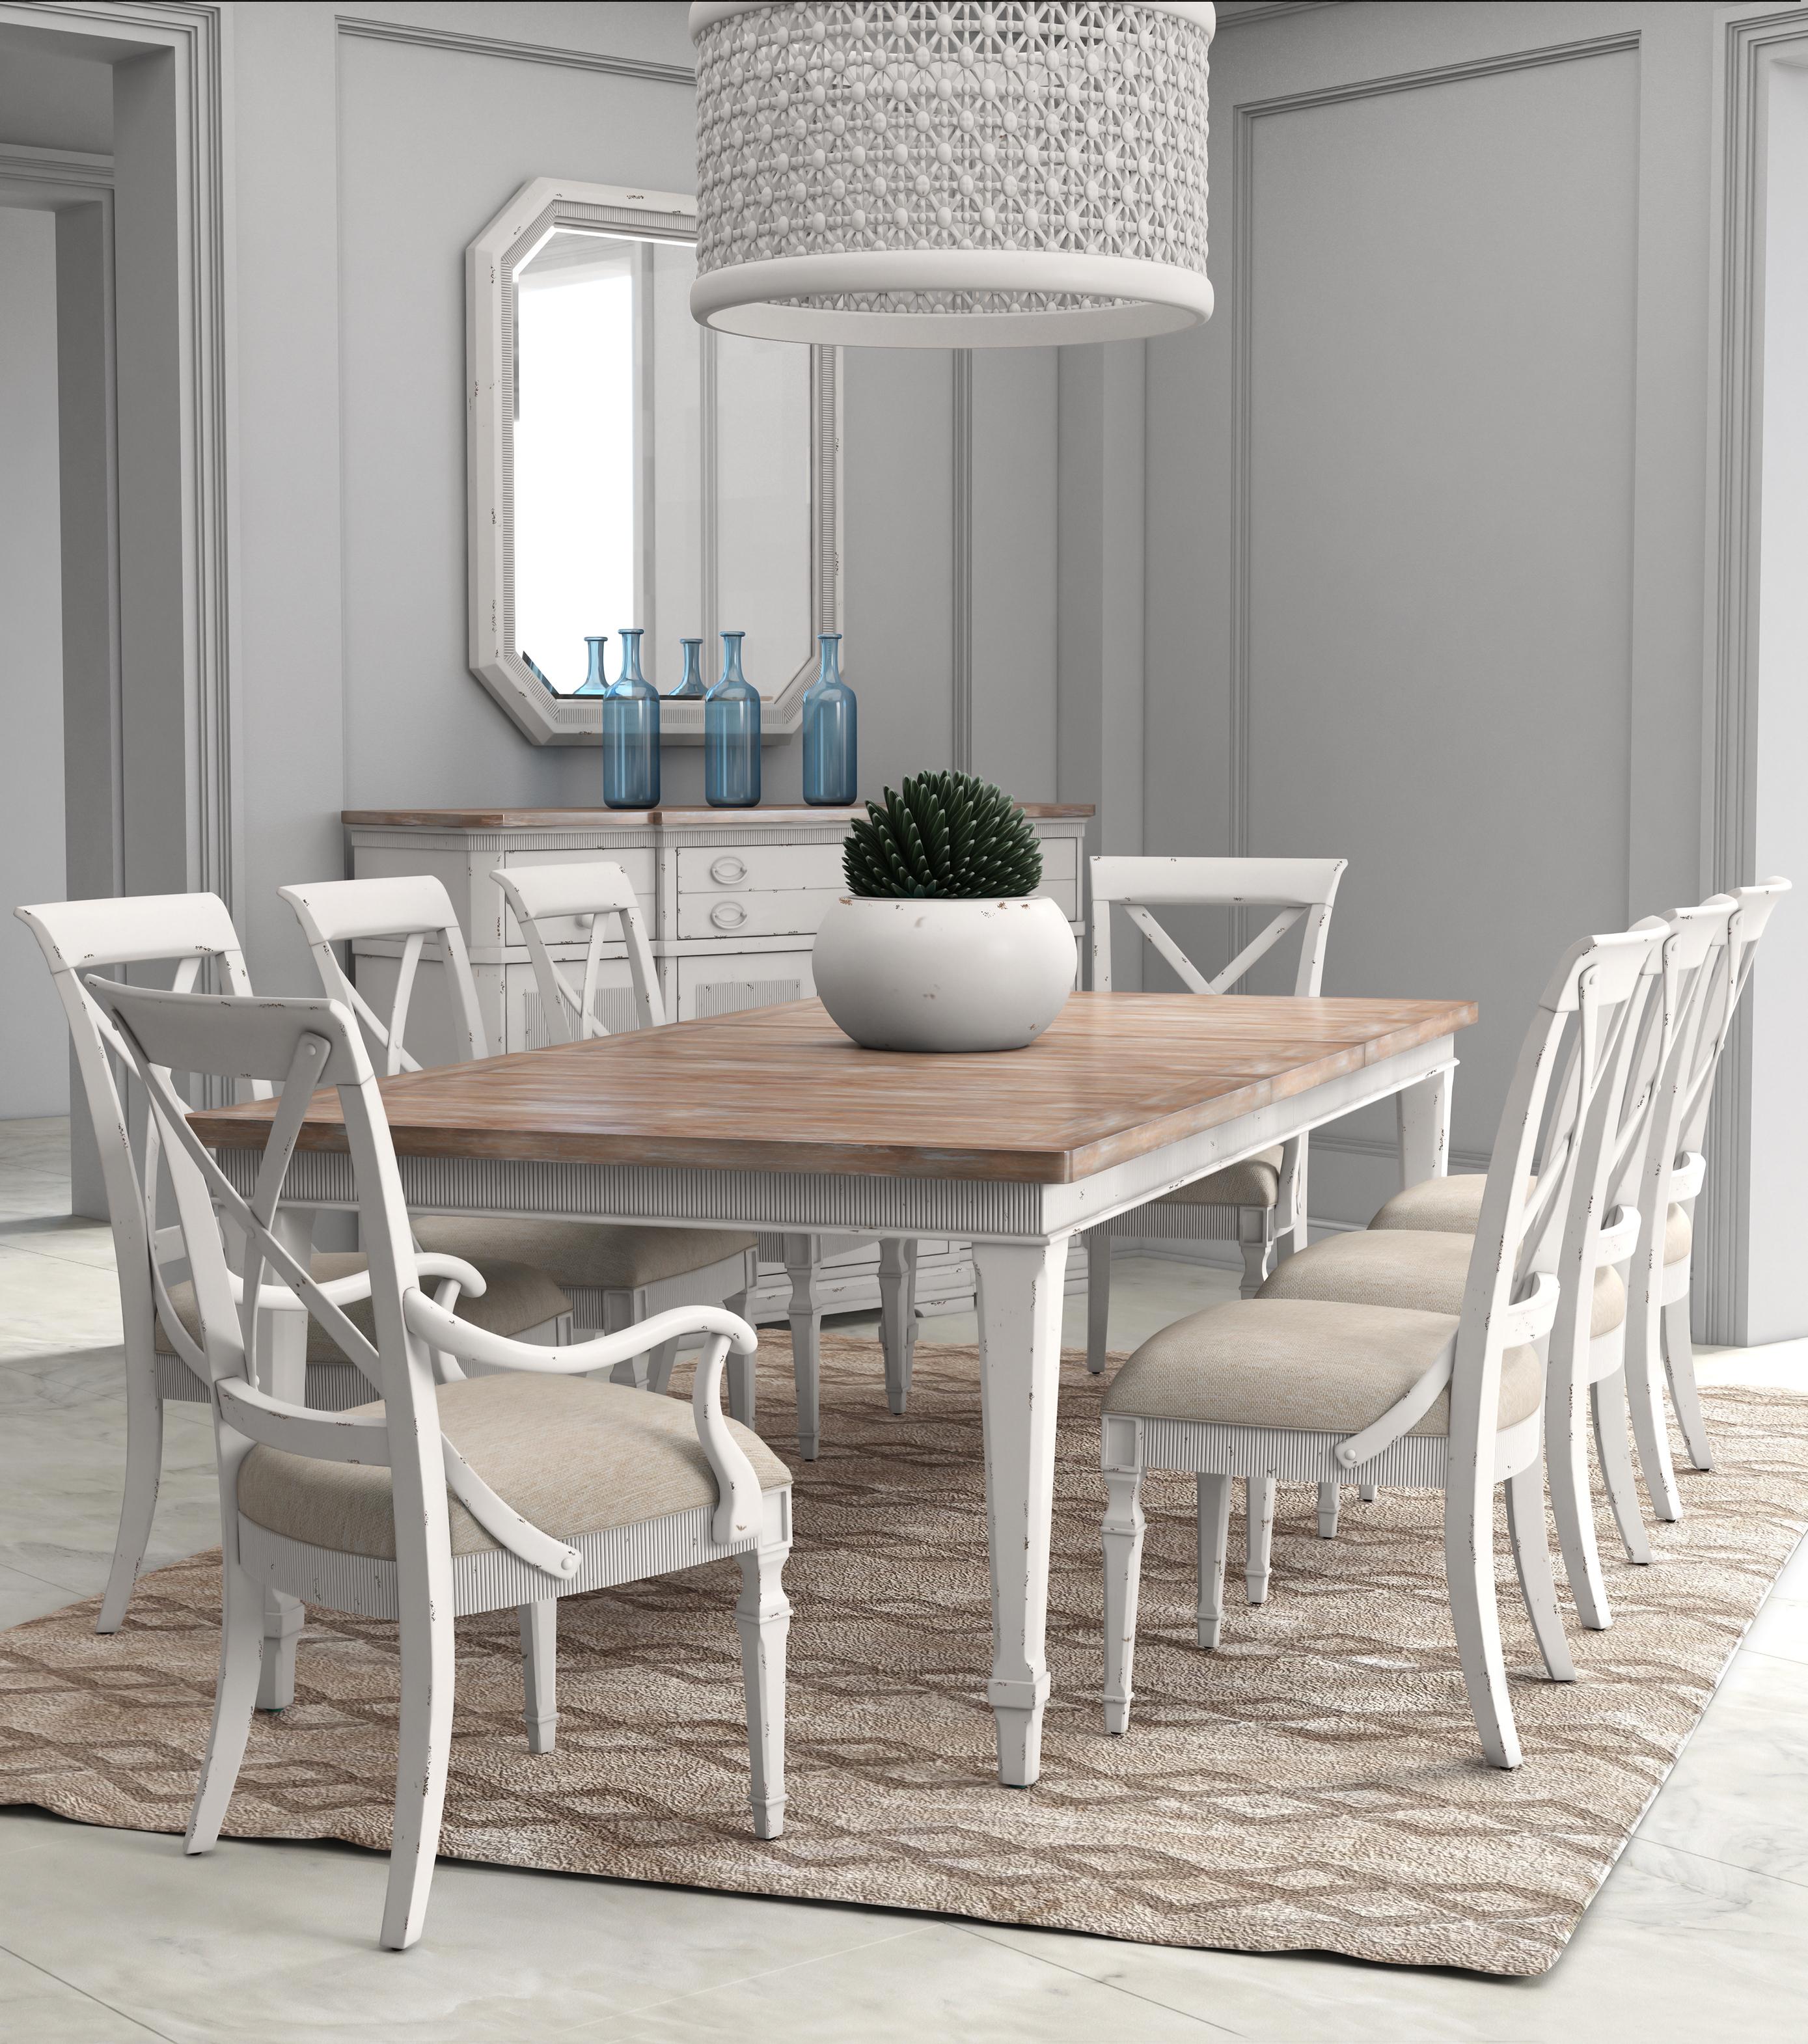 Urban, Farmhouse Dining Table Set Palisade 273220-2908-9pcs in Light Brown, Beige Fabric